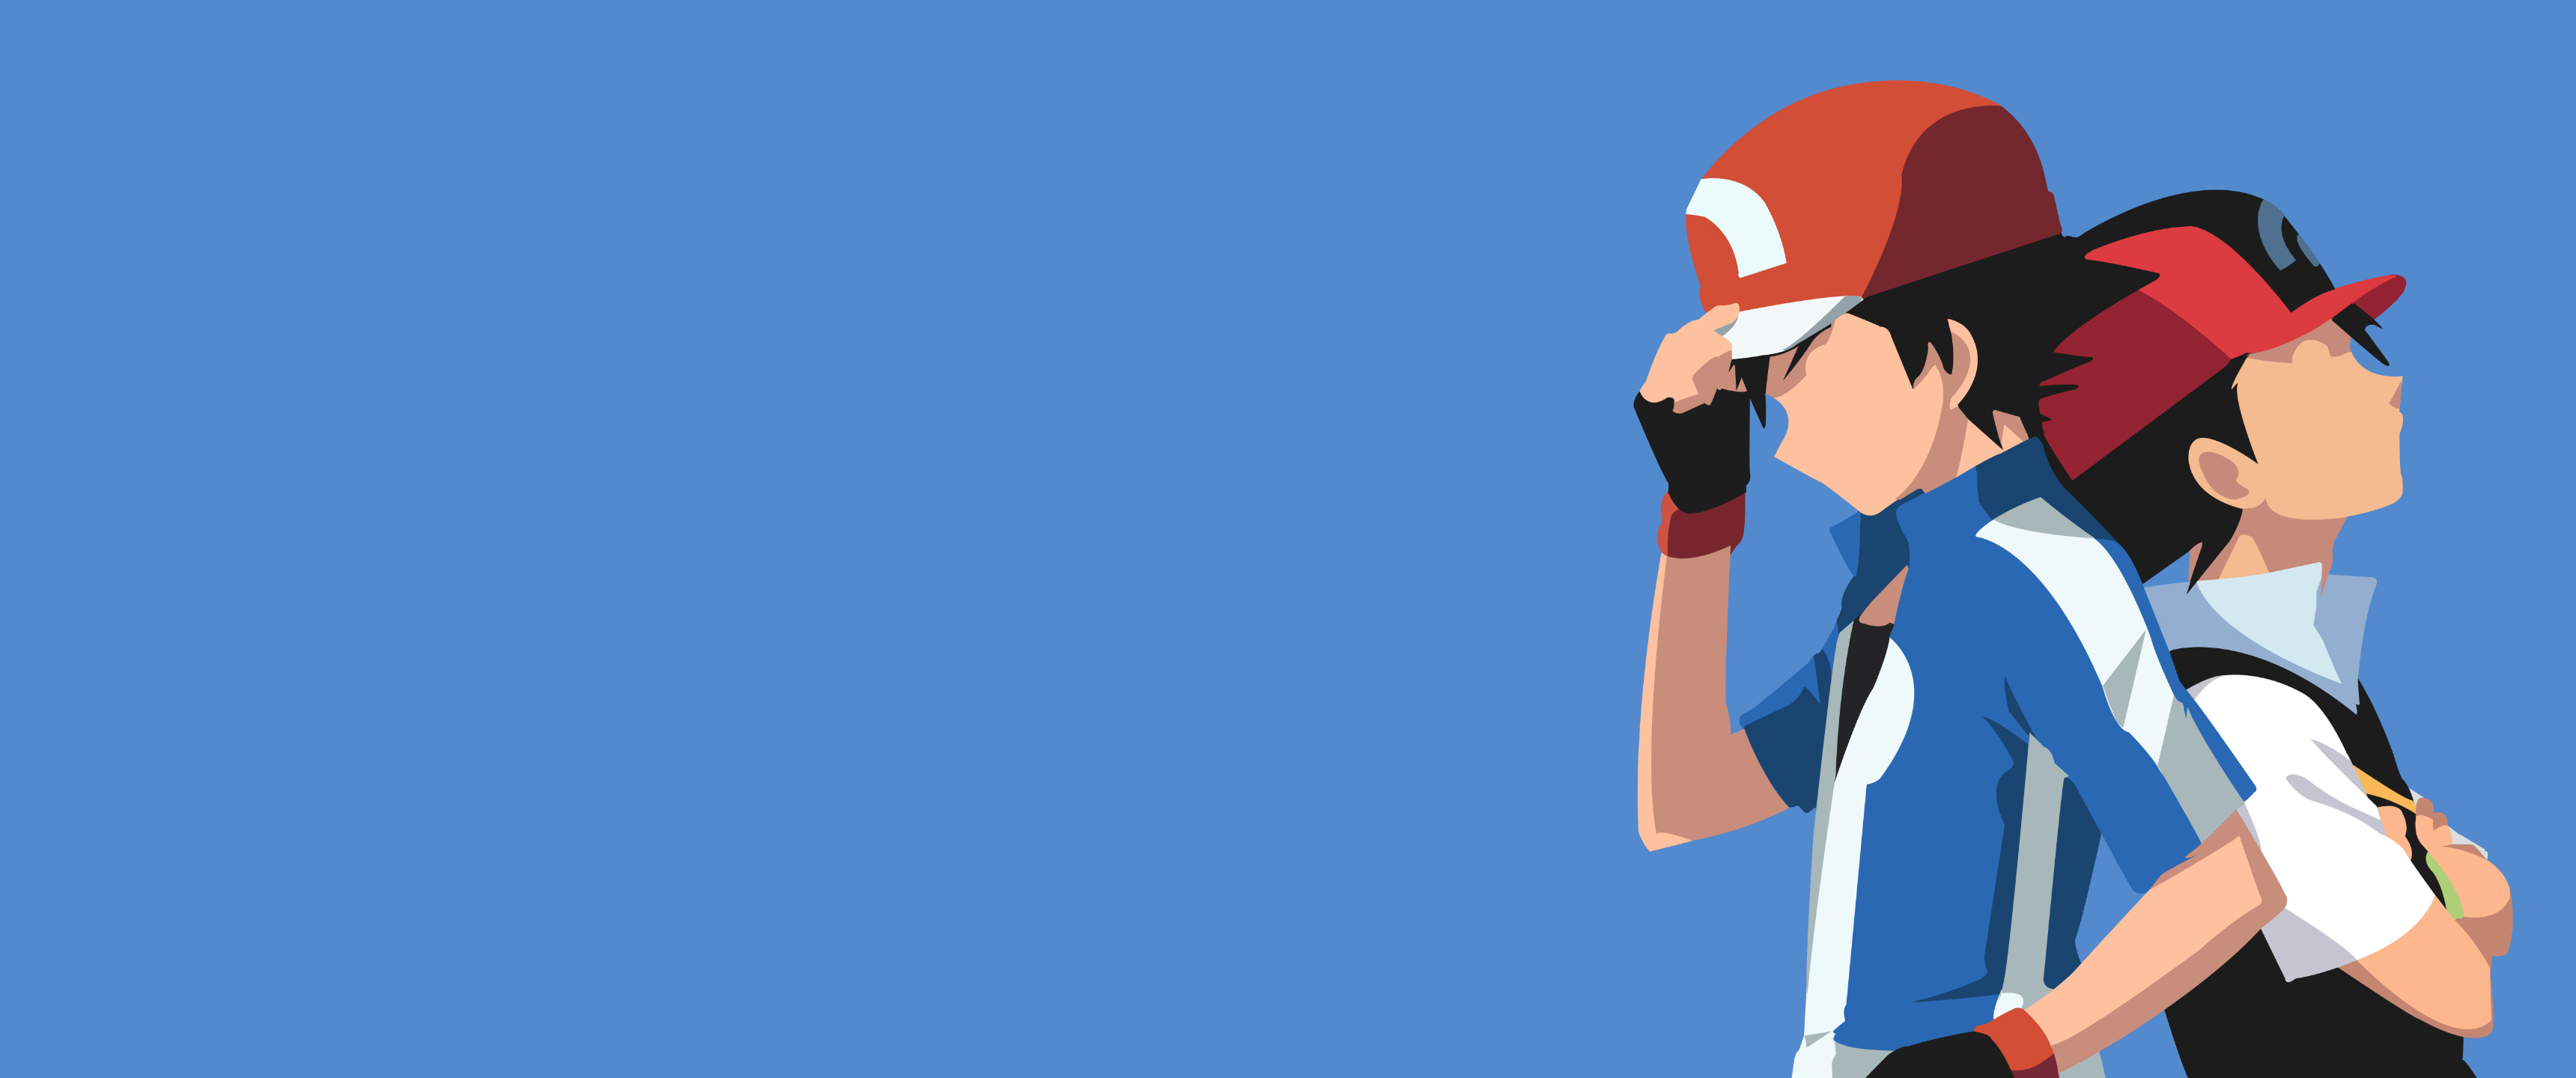 Ash And His Friends Pokémon Wallpapers  Wallpaper Cave